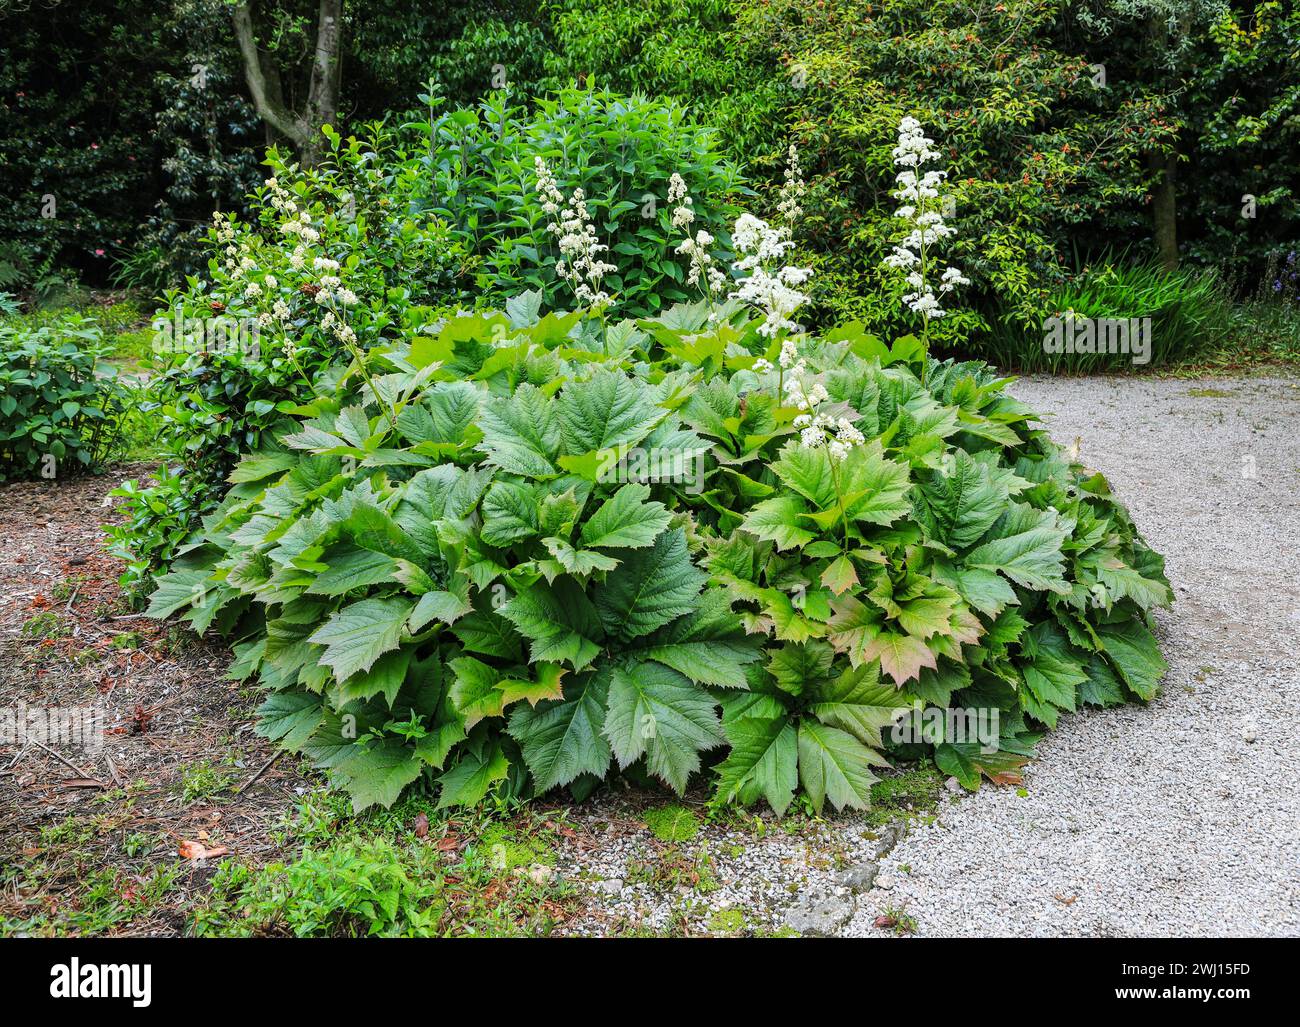 The White flower spike of a Rodgersia podophylla herbaceous perennial , Cornwall, England, UK Stock Photo